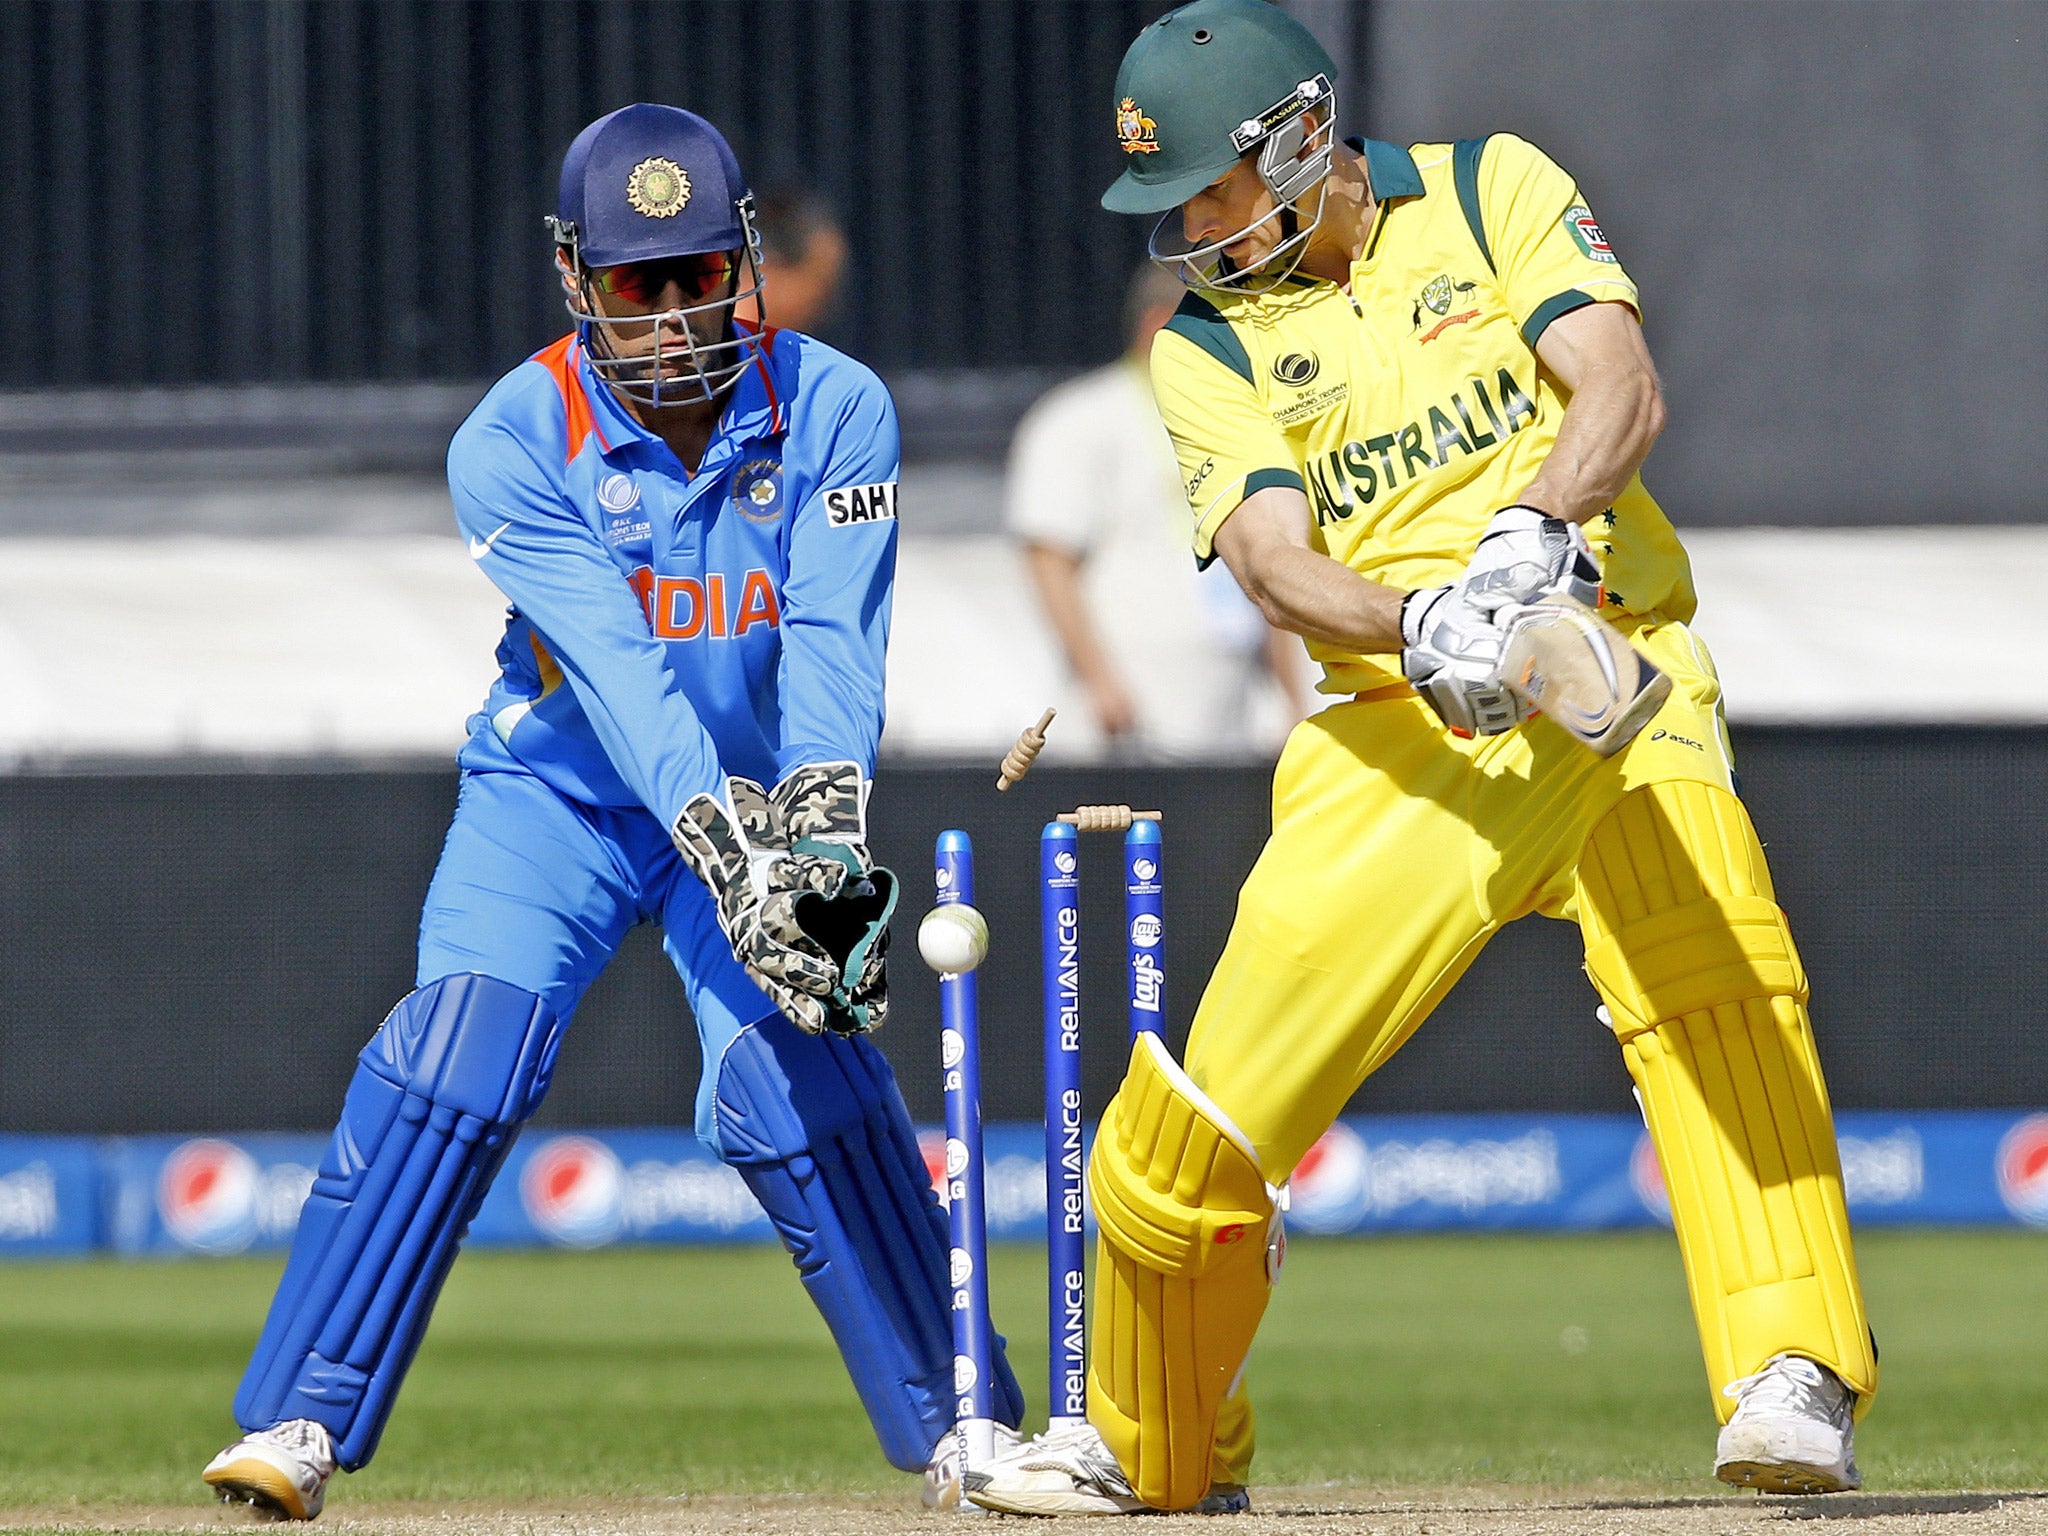 M S Dhoni looks on as Australia’s Adam Voges is bowled by R Ashwin